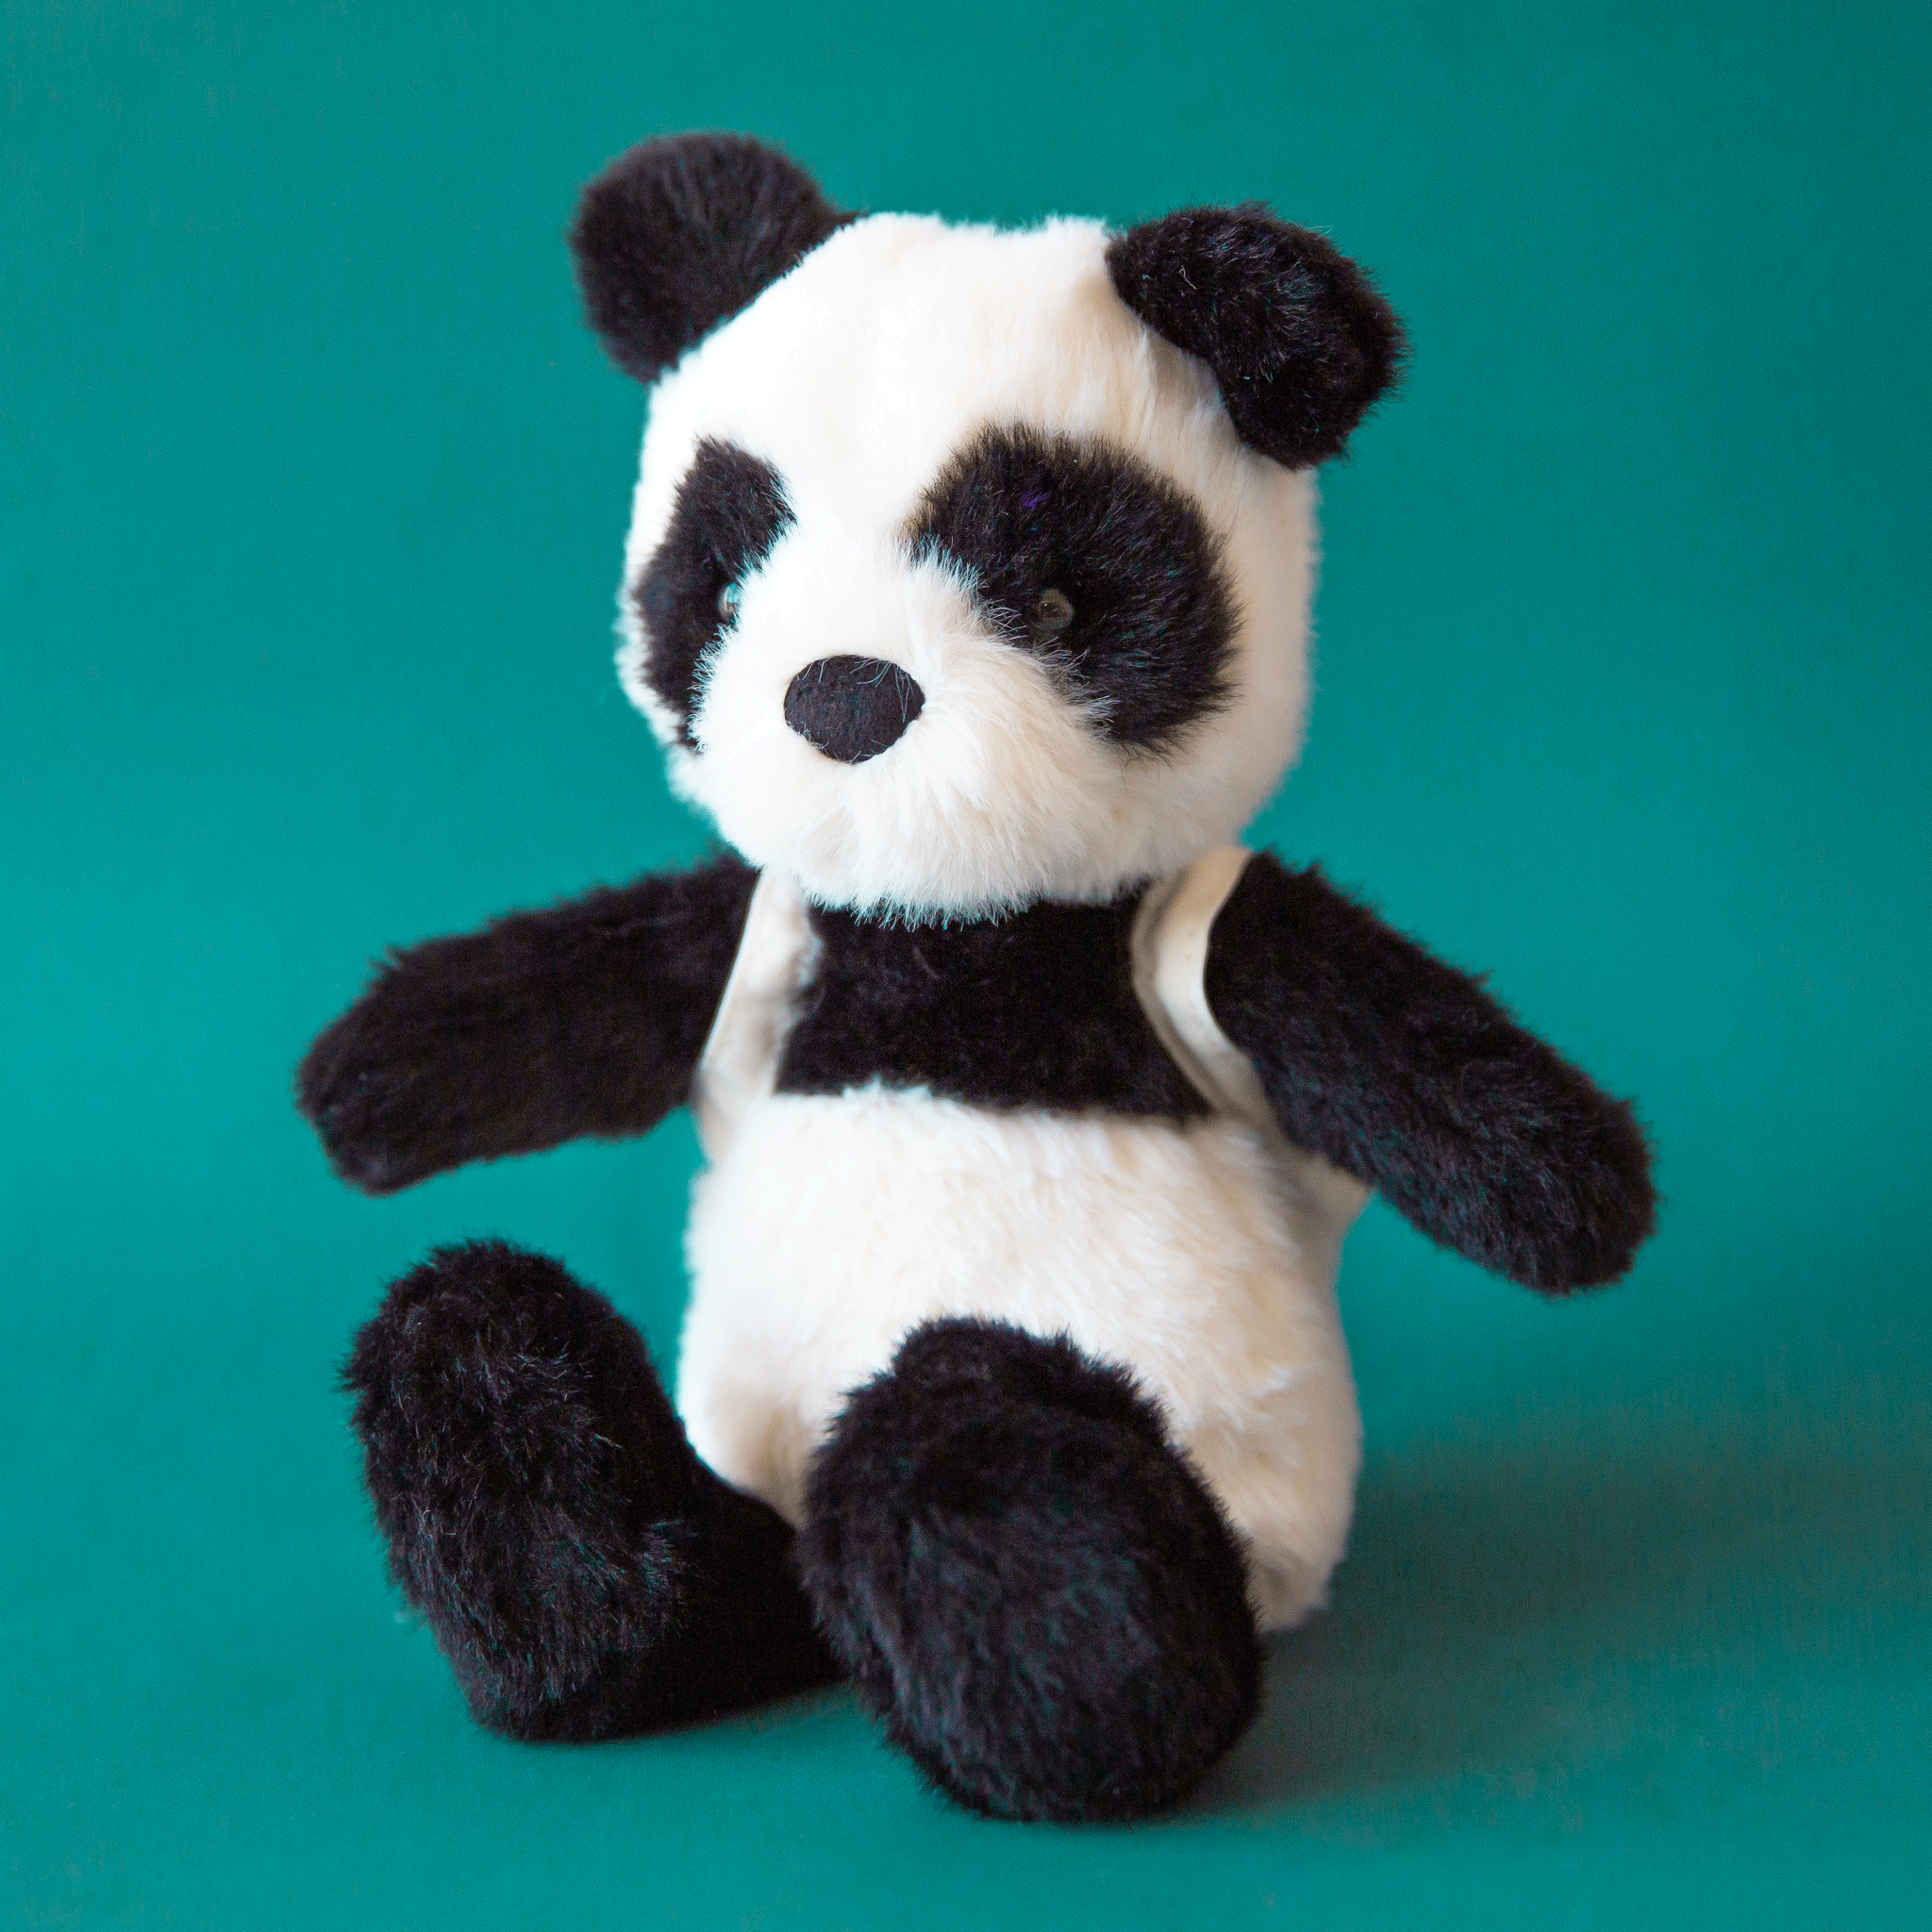 On a teal background is a black and white panda stuffed toy wearing a panda backpack.